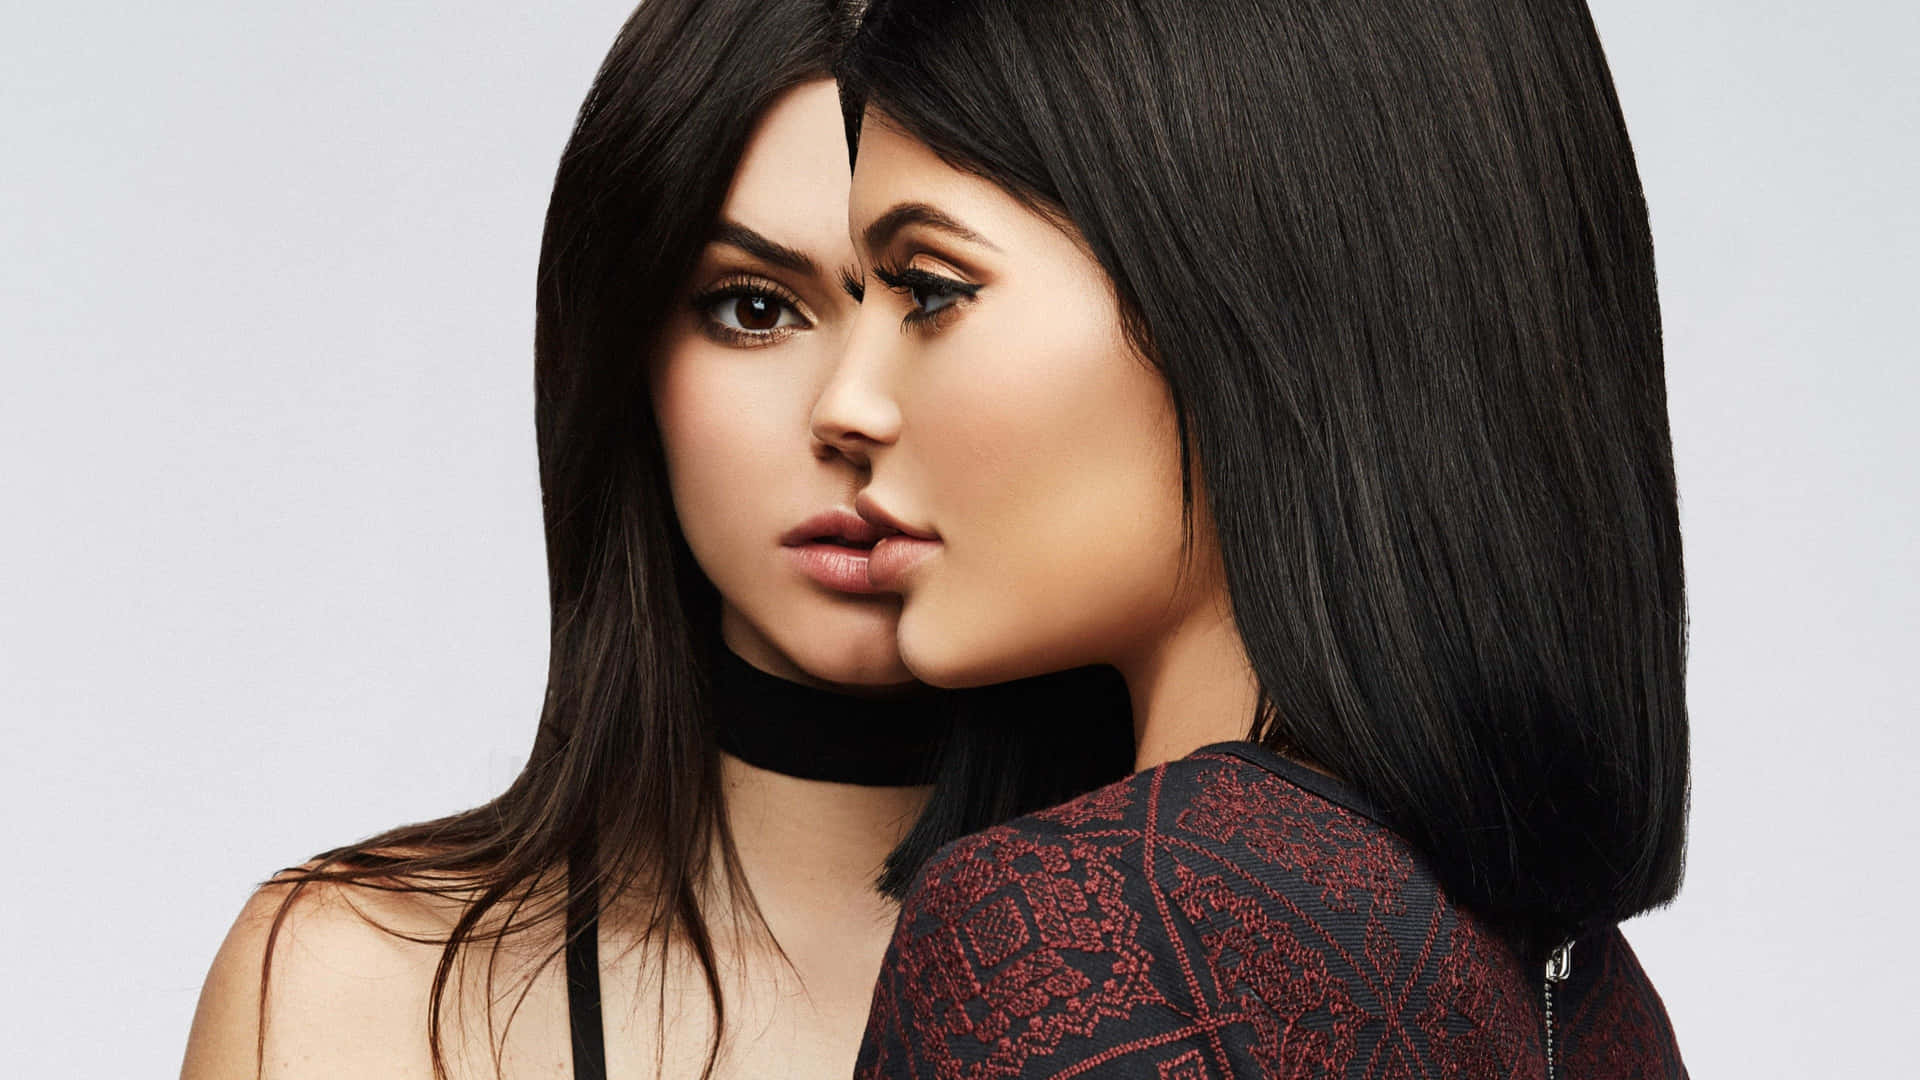 Kyliejenner Poserer For Paparazzi